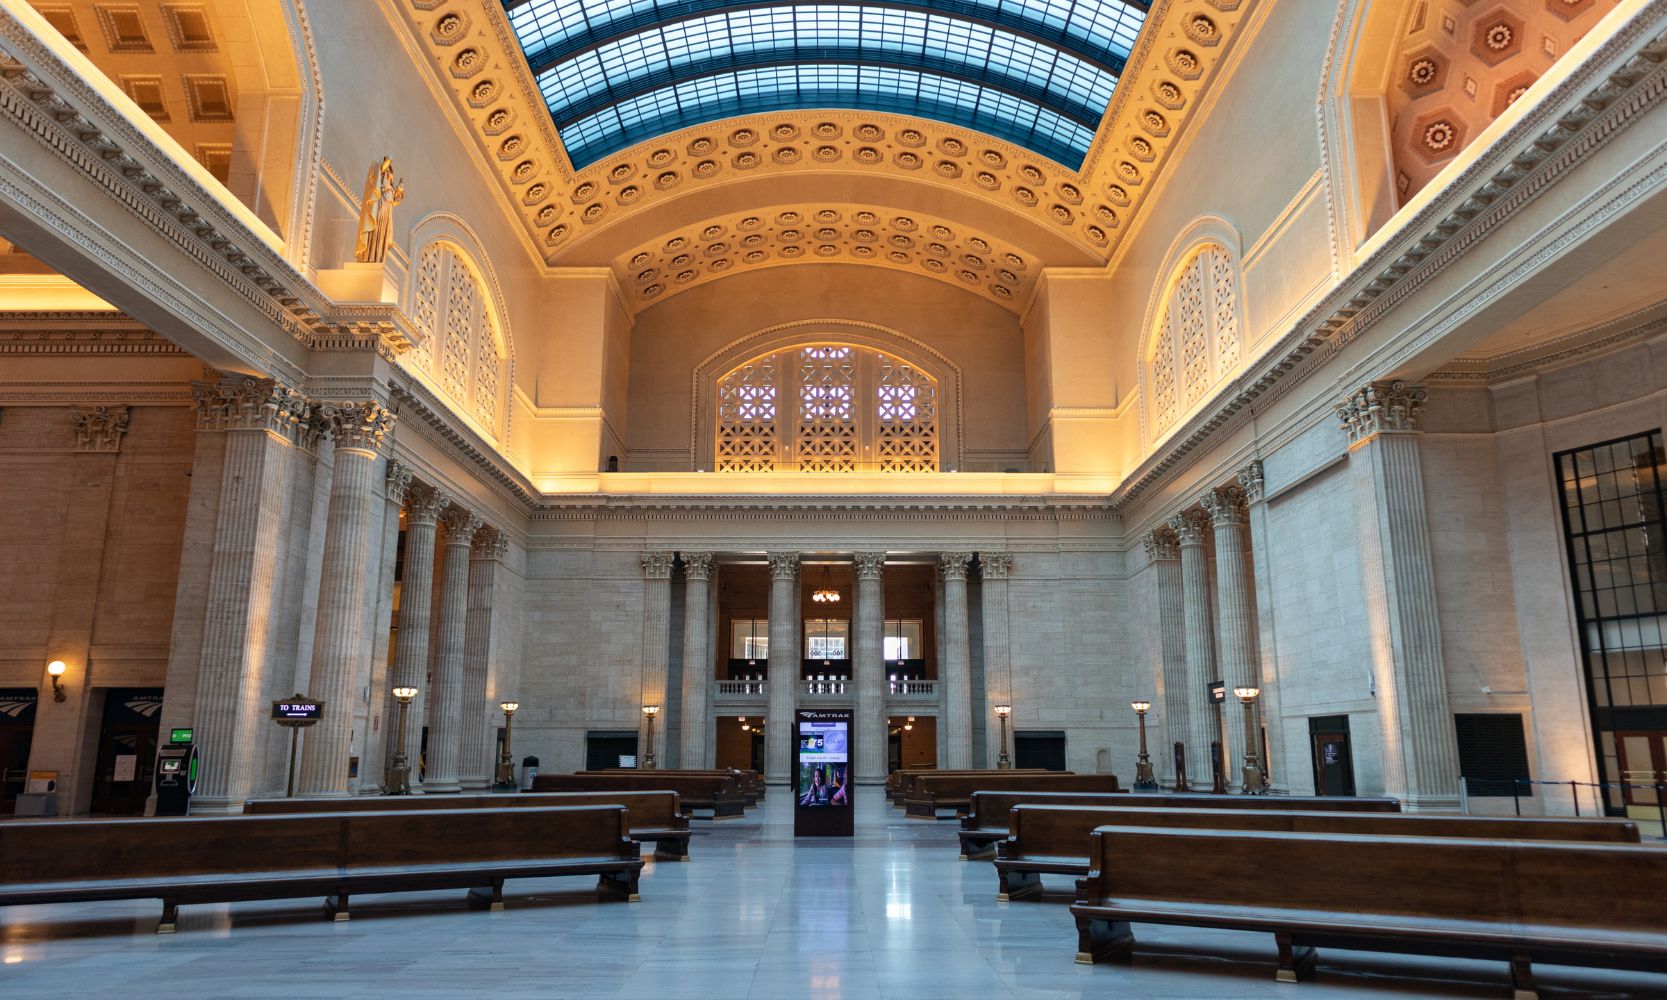 Image of the inside of Union Station